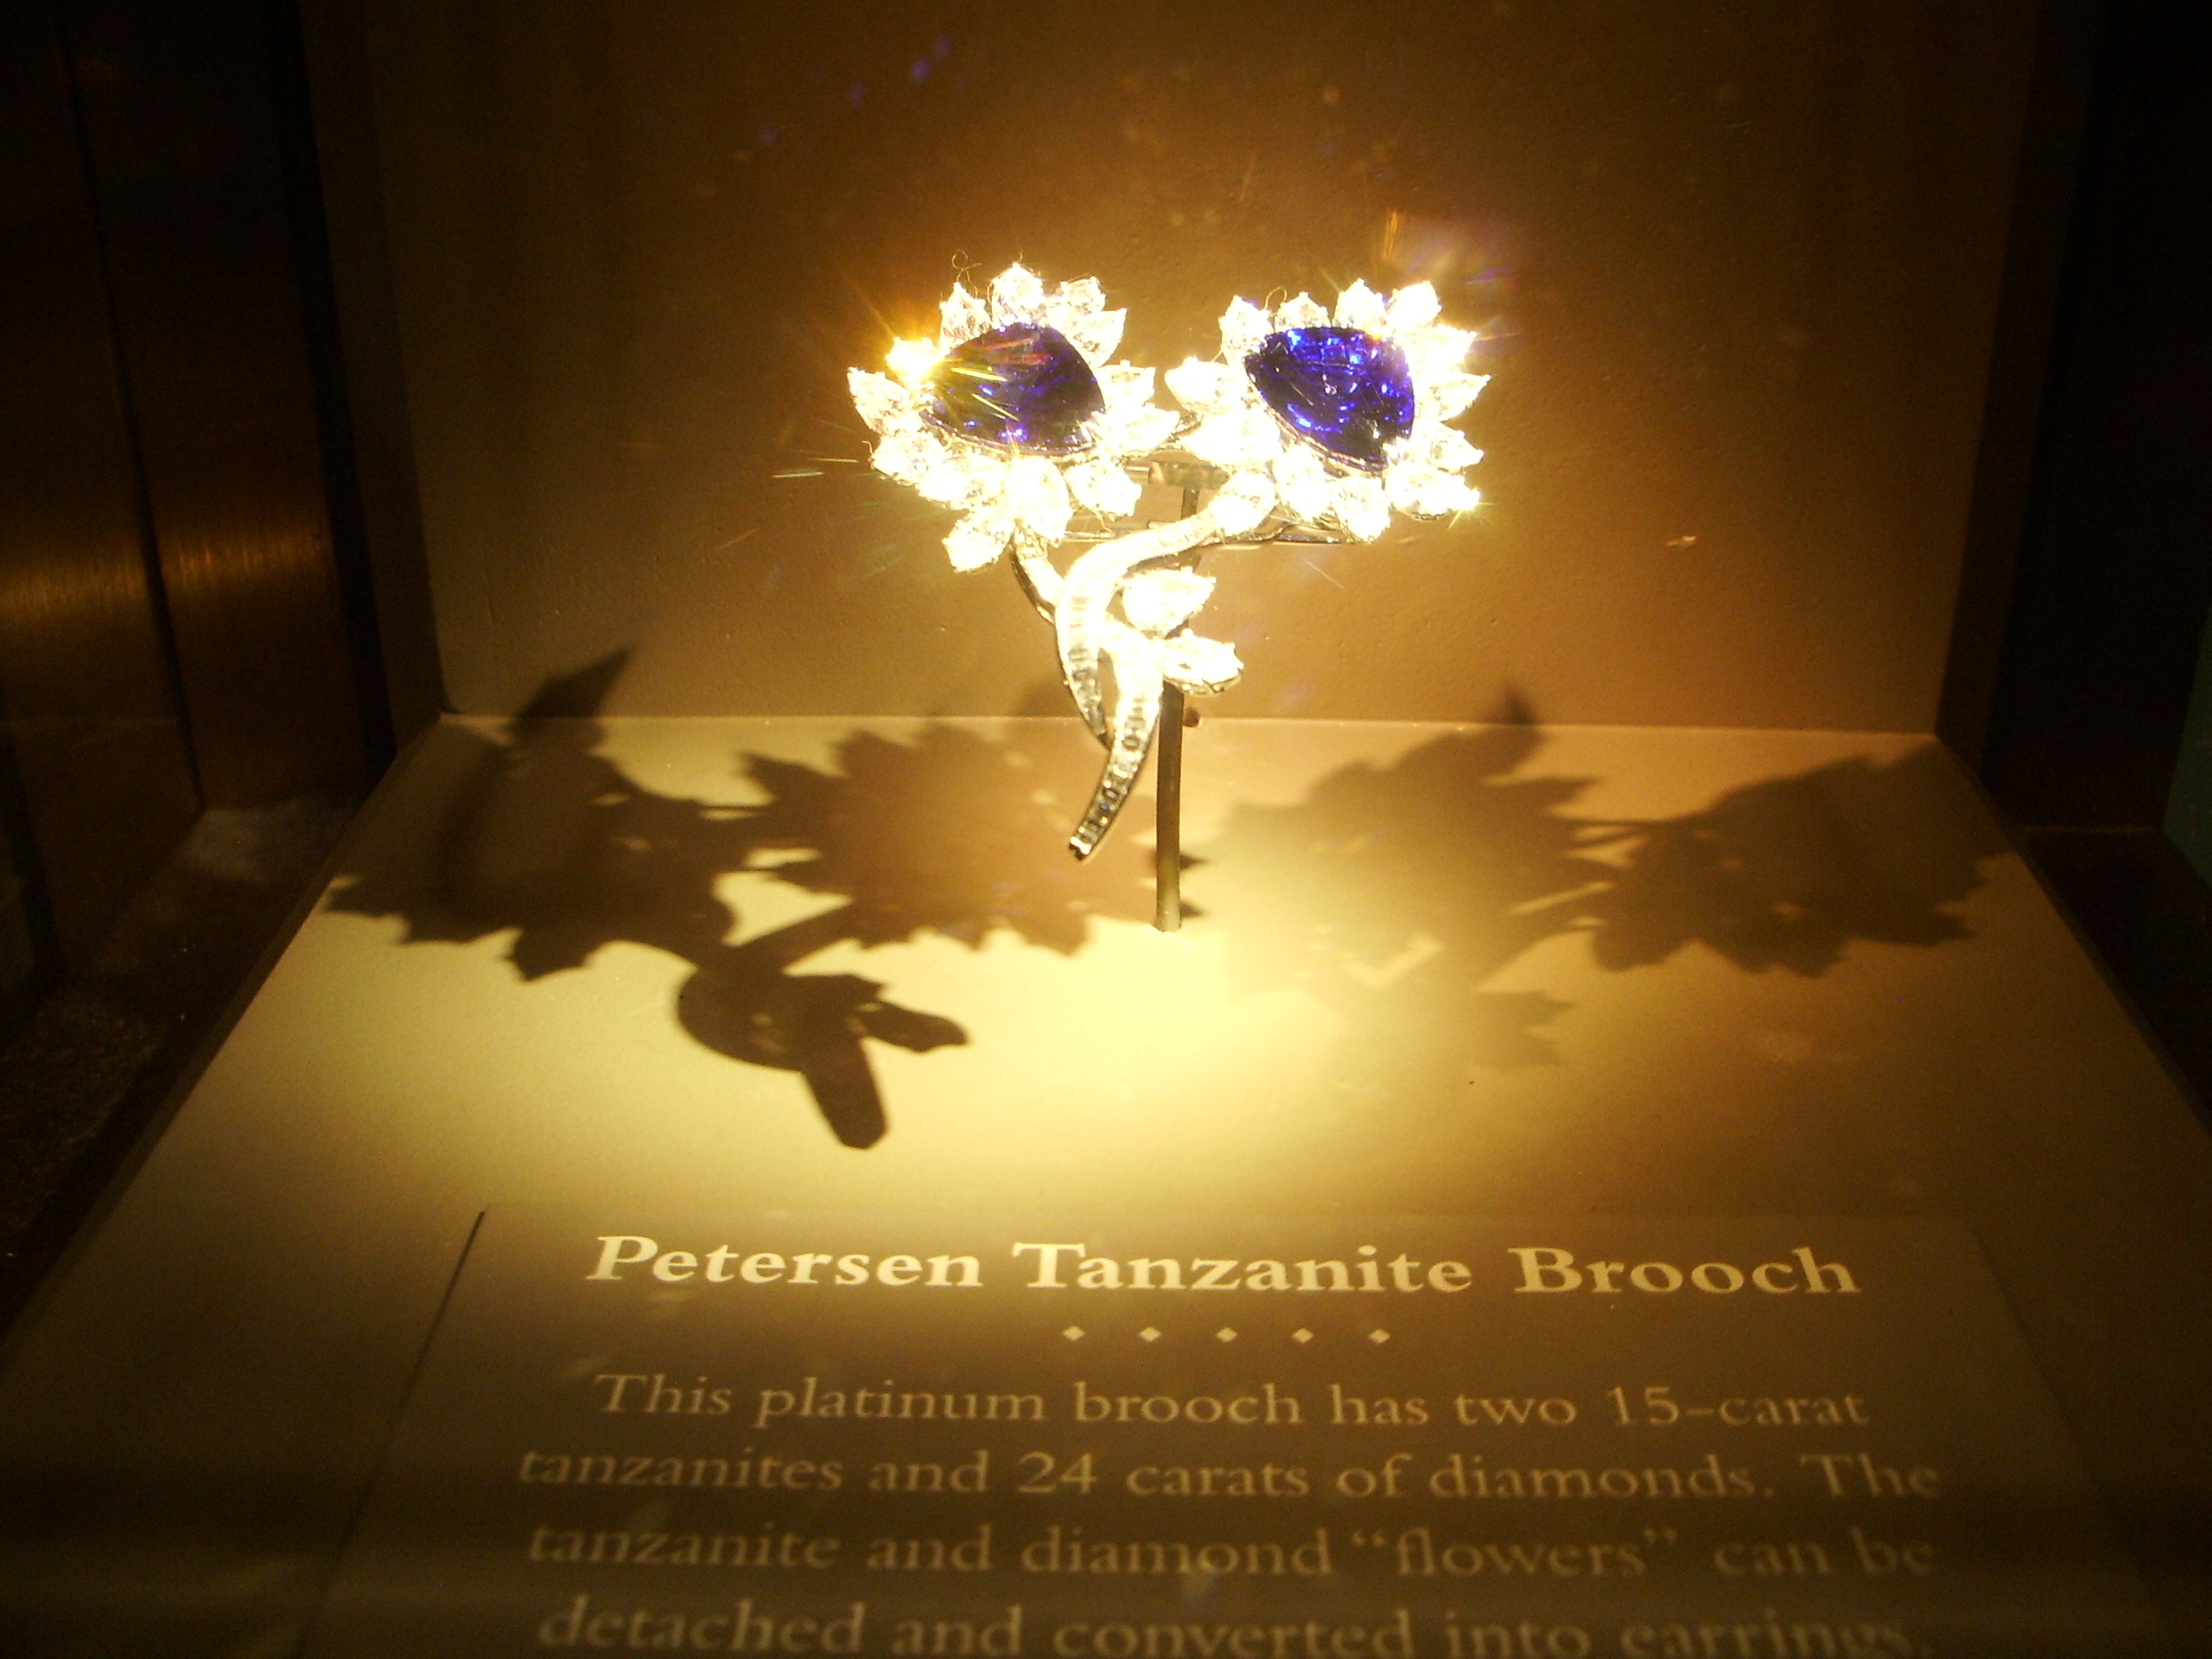 Peterson Tanzanite Broach at the Smithsonian Museum of Natural History